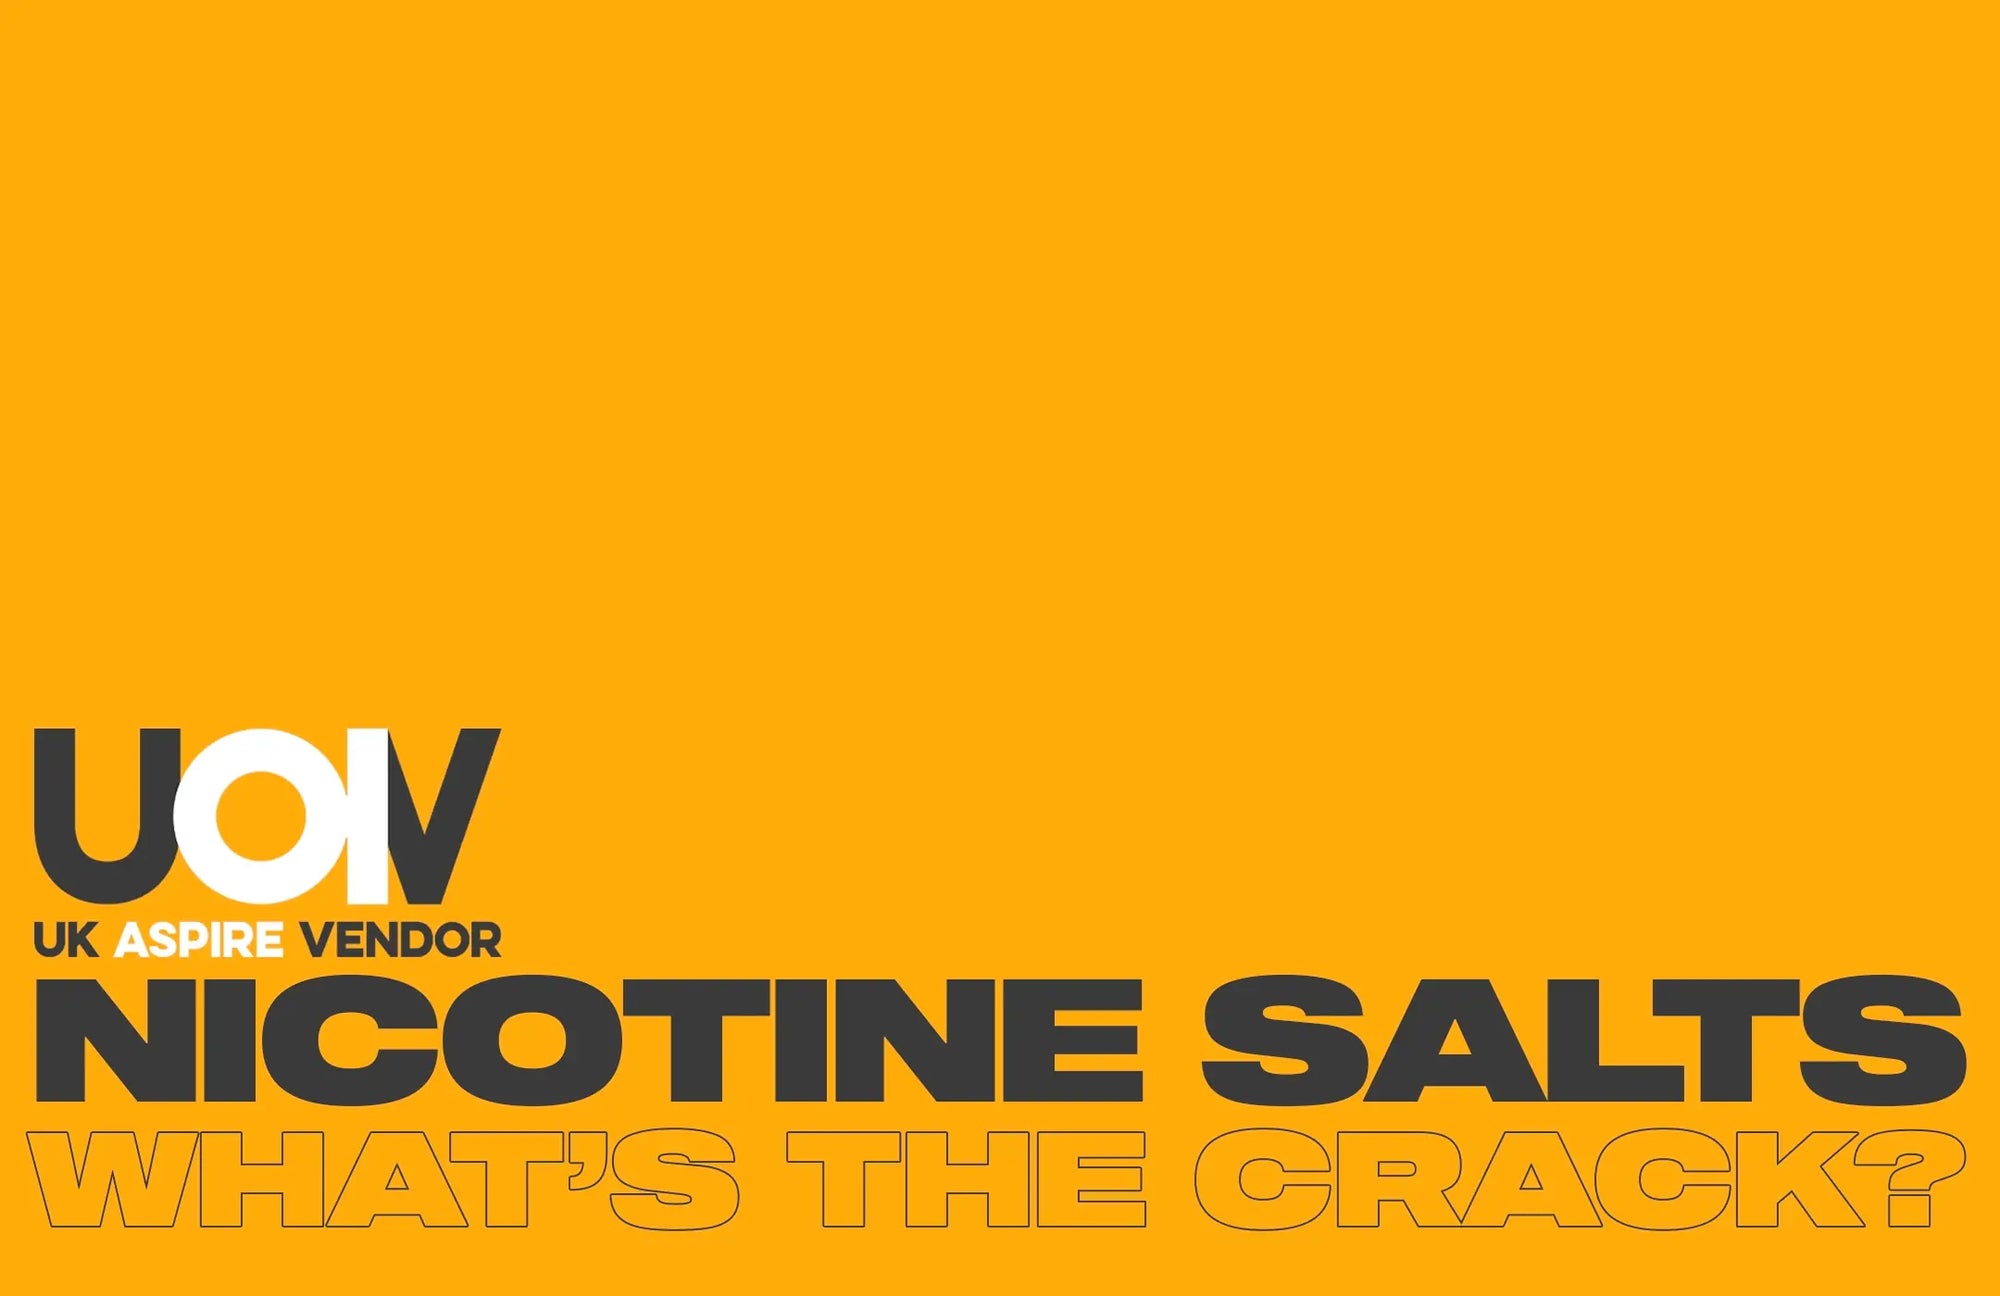 Tired of harsh throat hits and slow nicotine absorption? Try nicotine salts for a much smoother hit and faster absorption. Learn more about the latest e-liquid trends in our latest article.